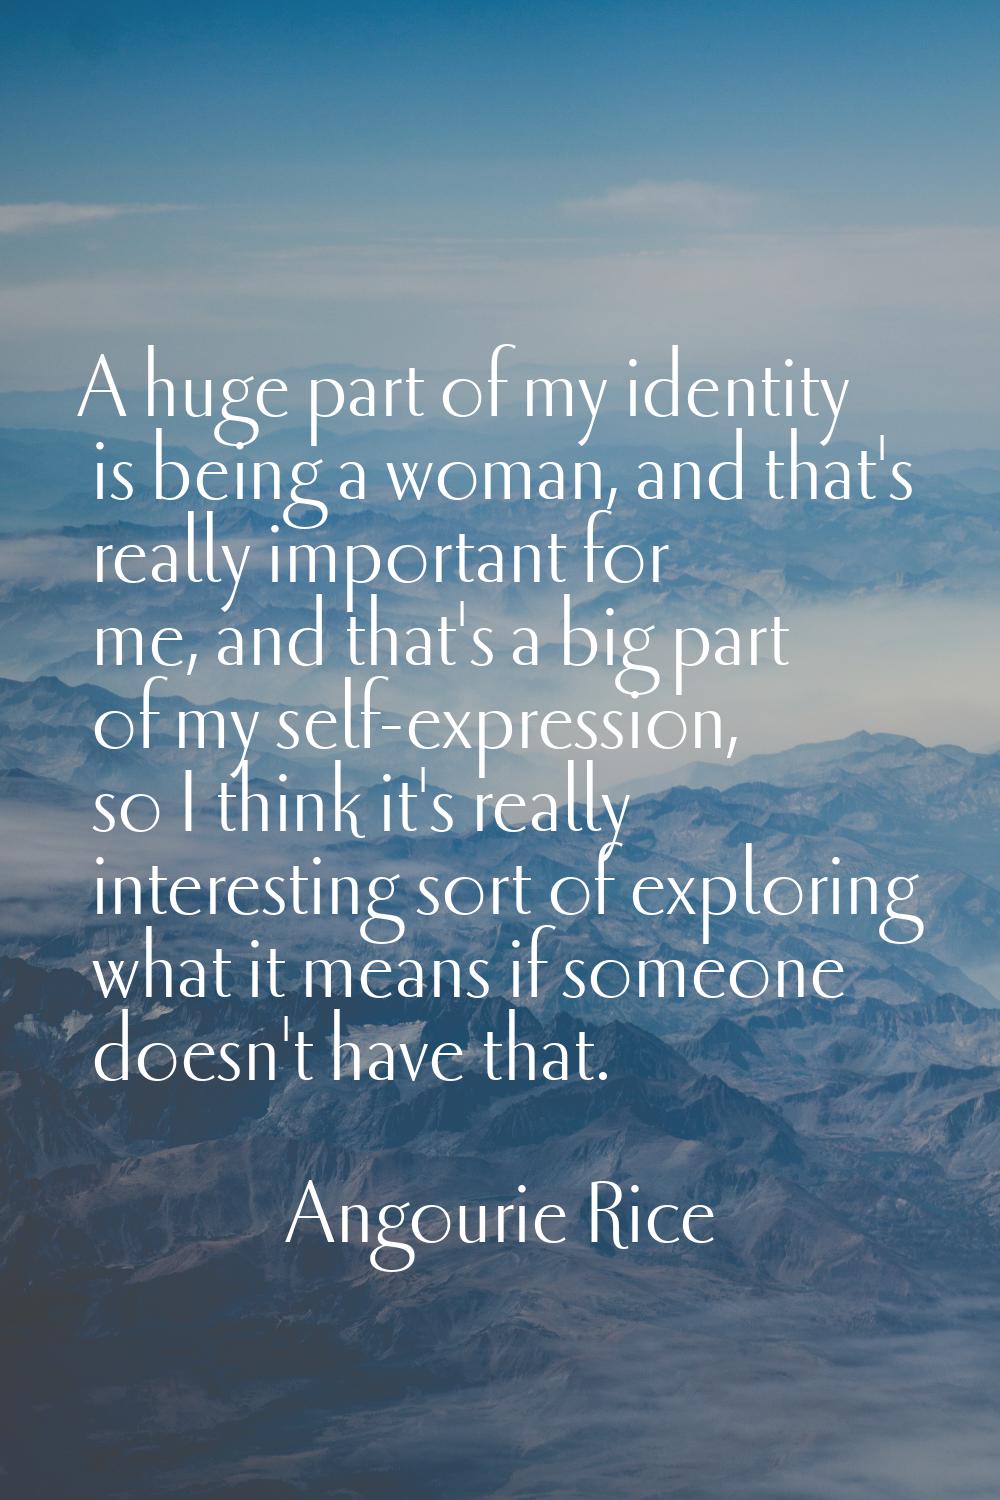 A huge part of my identity is being a woman, and that's really important for me, and that's a big p